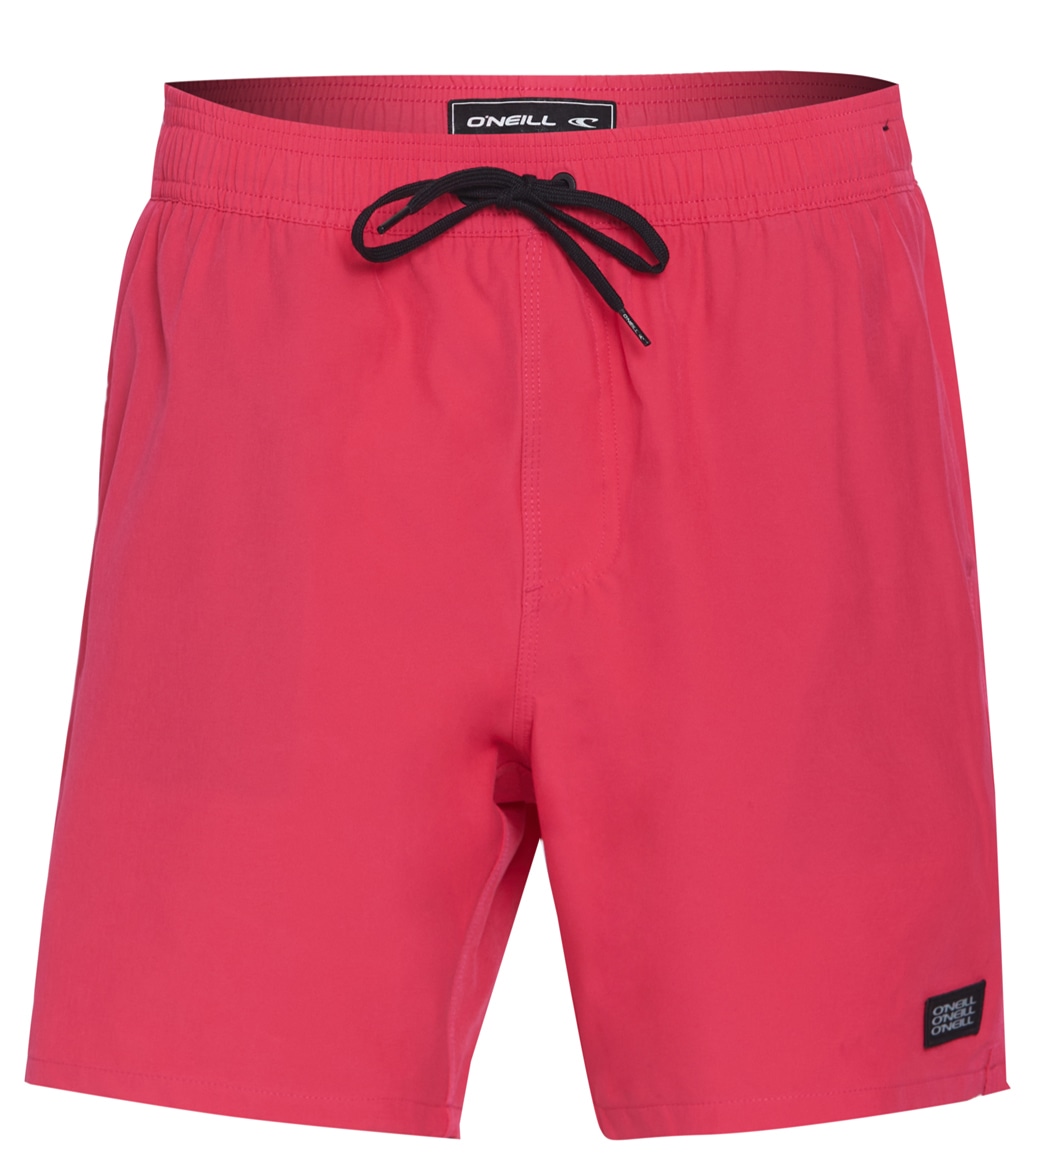 O'neill Men's 17 Solid Volley Short - Fuchsia Large Polyester - Swimoutlet.com